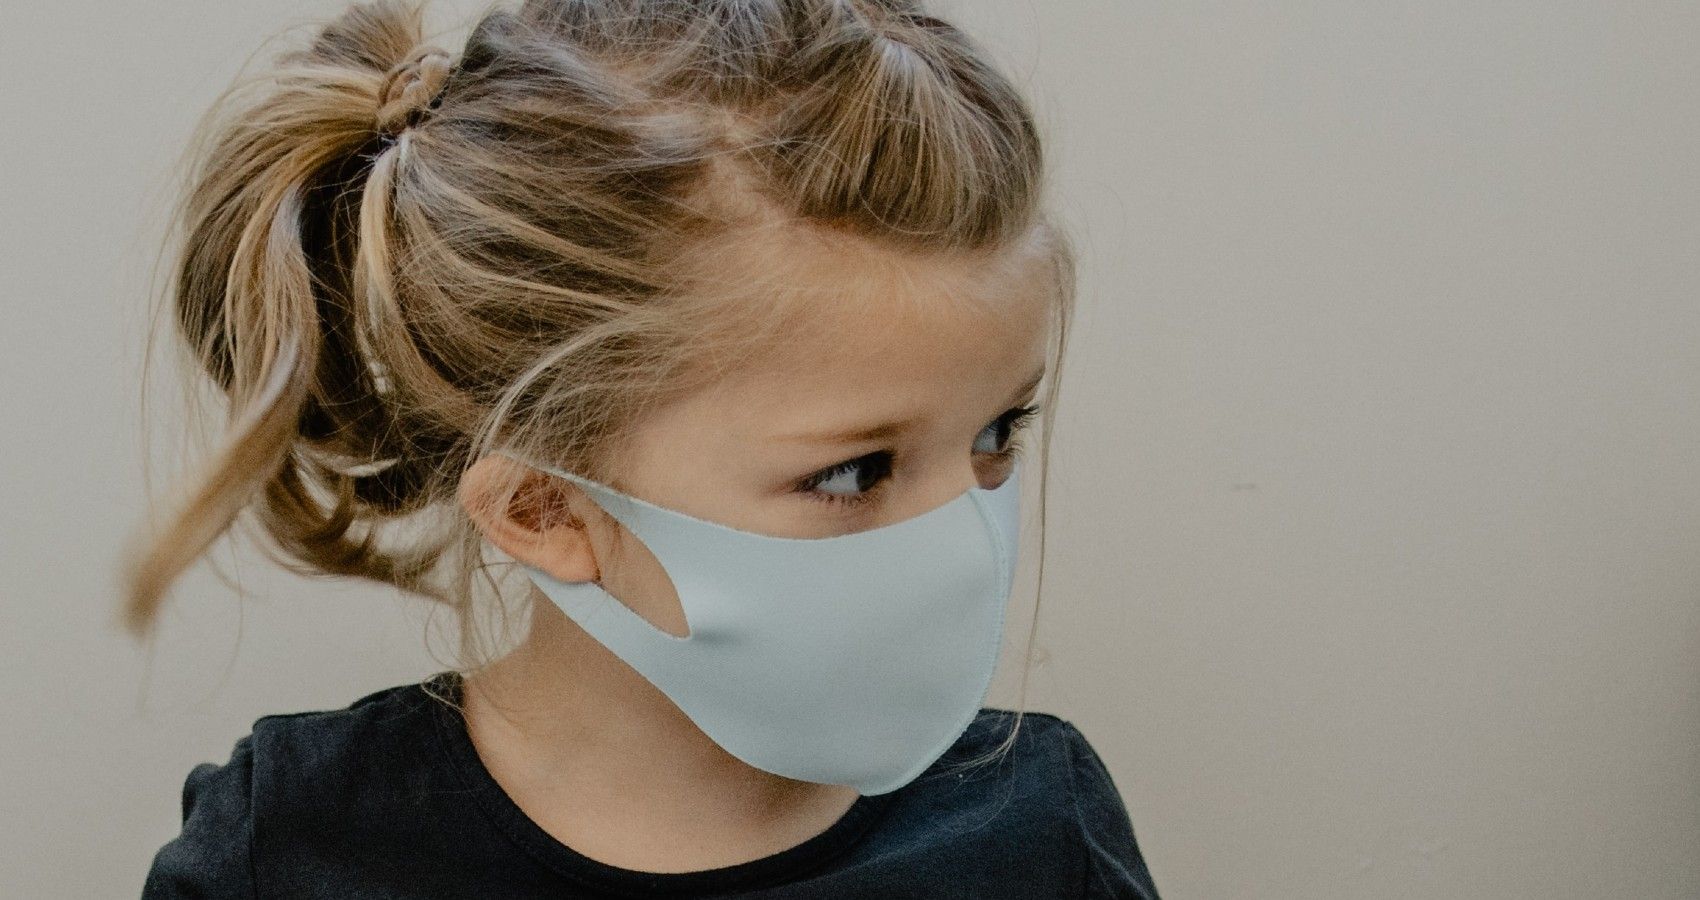 A young girl sitting inside with a face mask on